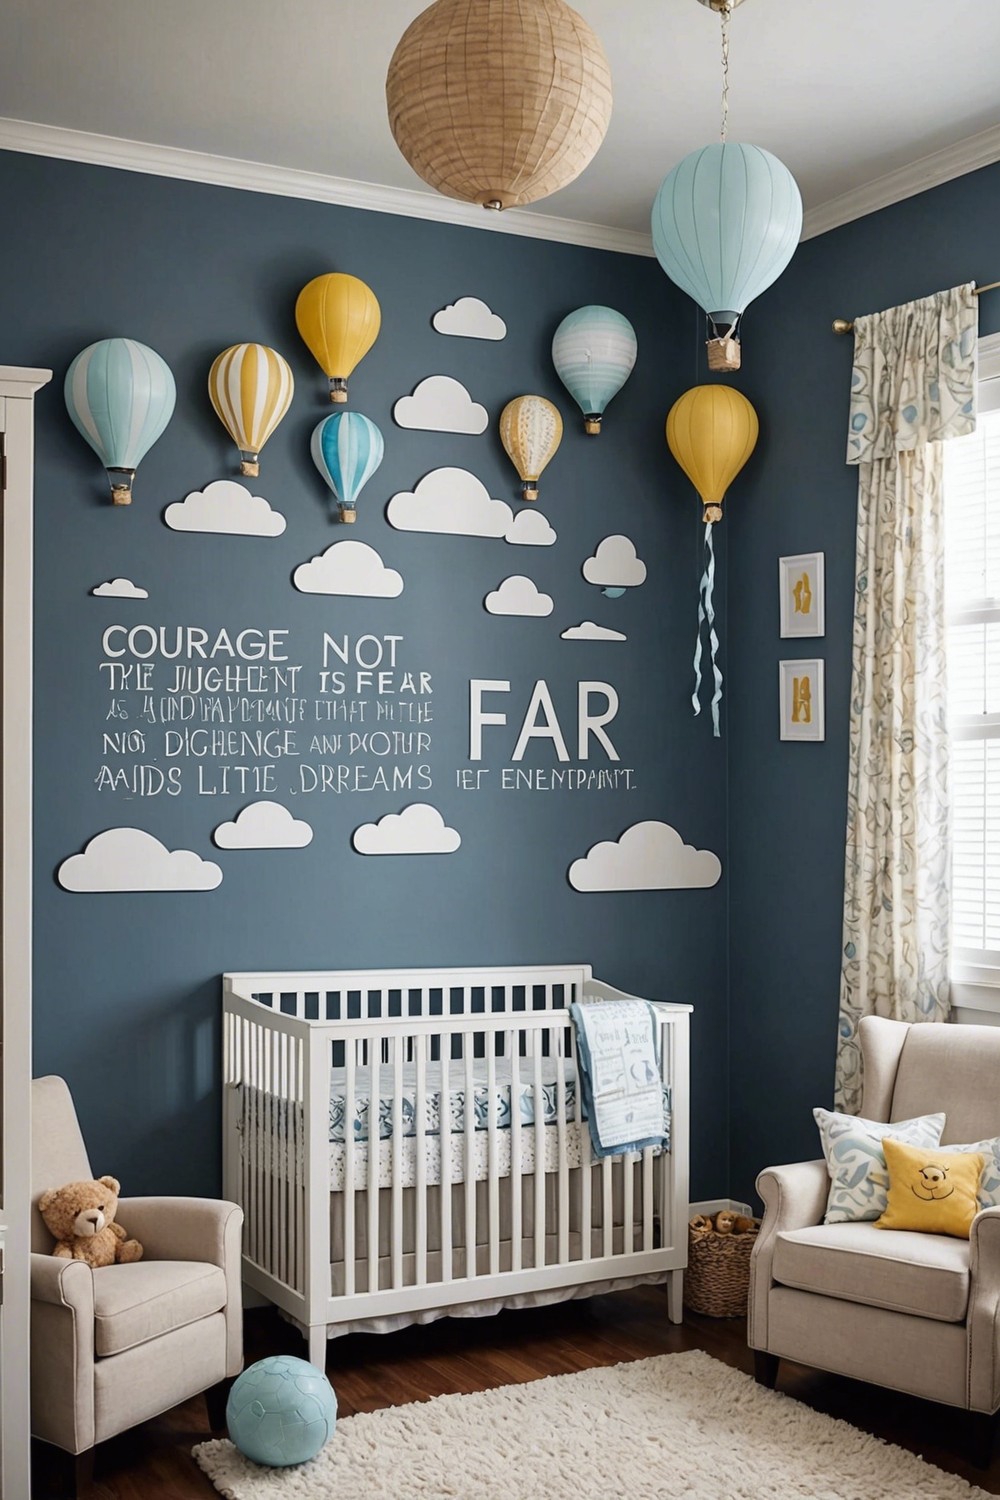 Inspirational Quote Wall Art for Motivation